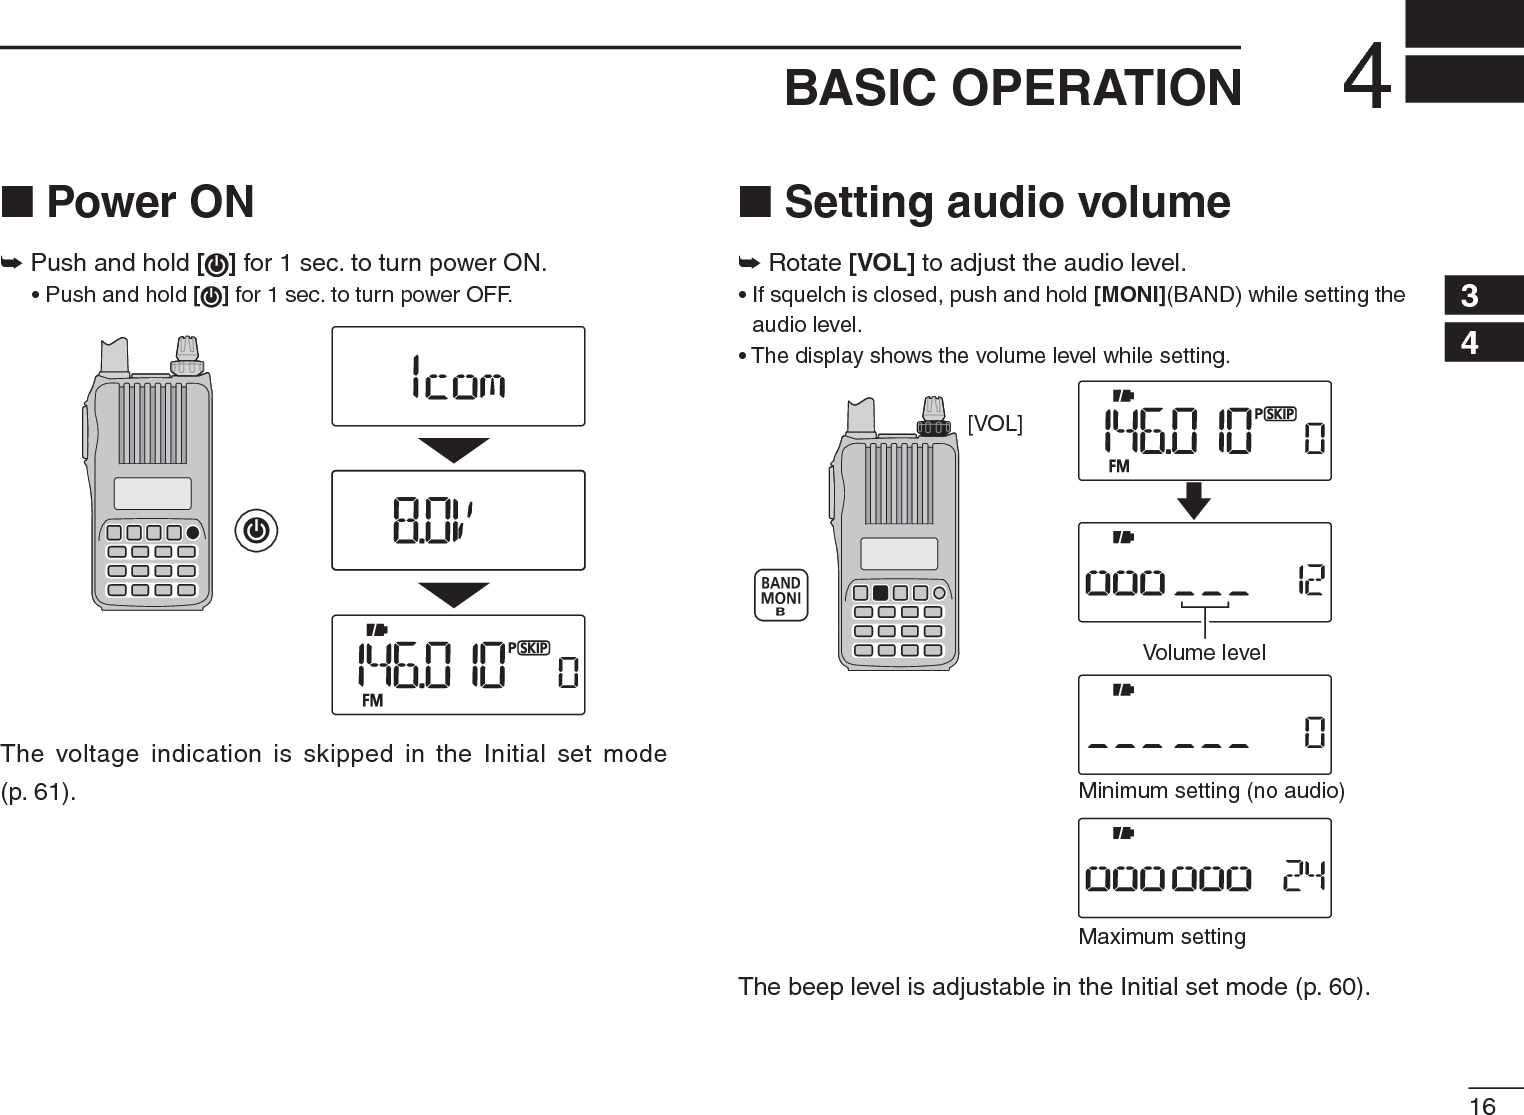 164BASIC OPERATION12345678910111213141516171819N Power ON± Push and hold [ ] for 1 sec. to turn power ON.• Push and hold [ ] for 1 sec. to turn power OFF.The voltage indication is skipped in the Initial set mode (p. 61).N Setting audio volume± Rotate [VOL]to adjust the audio level. • If squelch is closed, push and hold [MONI](BAND) while setting the audio level.• The display shows the volume level while setting.[VOL]Minimum setting (no audio)Maximum settingVolume levelThe beep level is adjustable in the Initial set mode (p. 60).